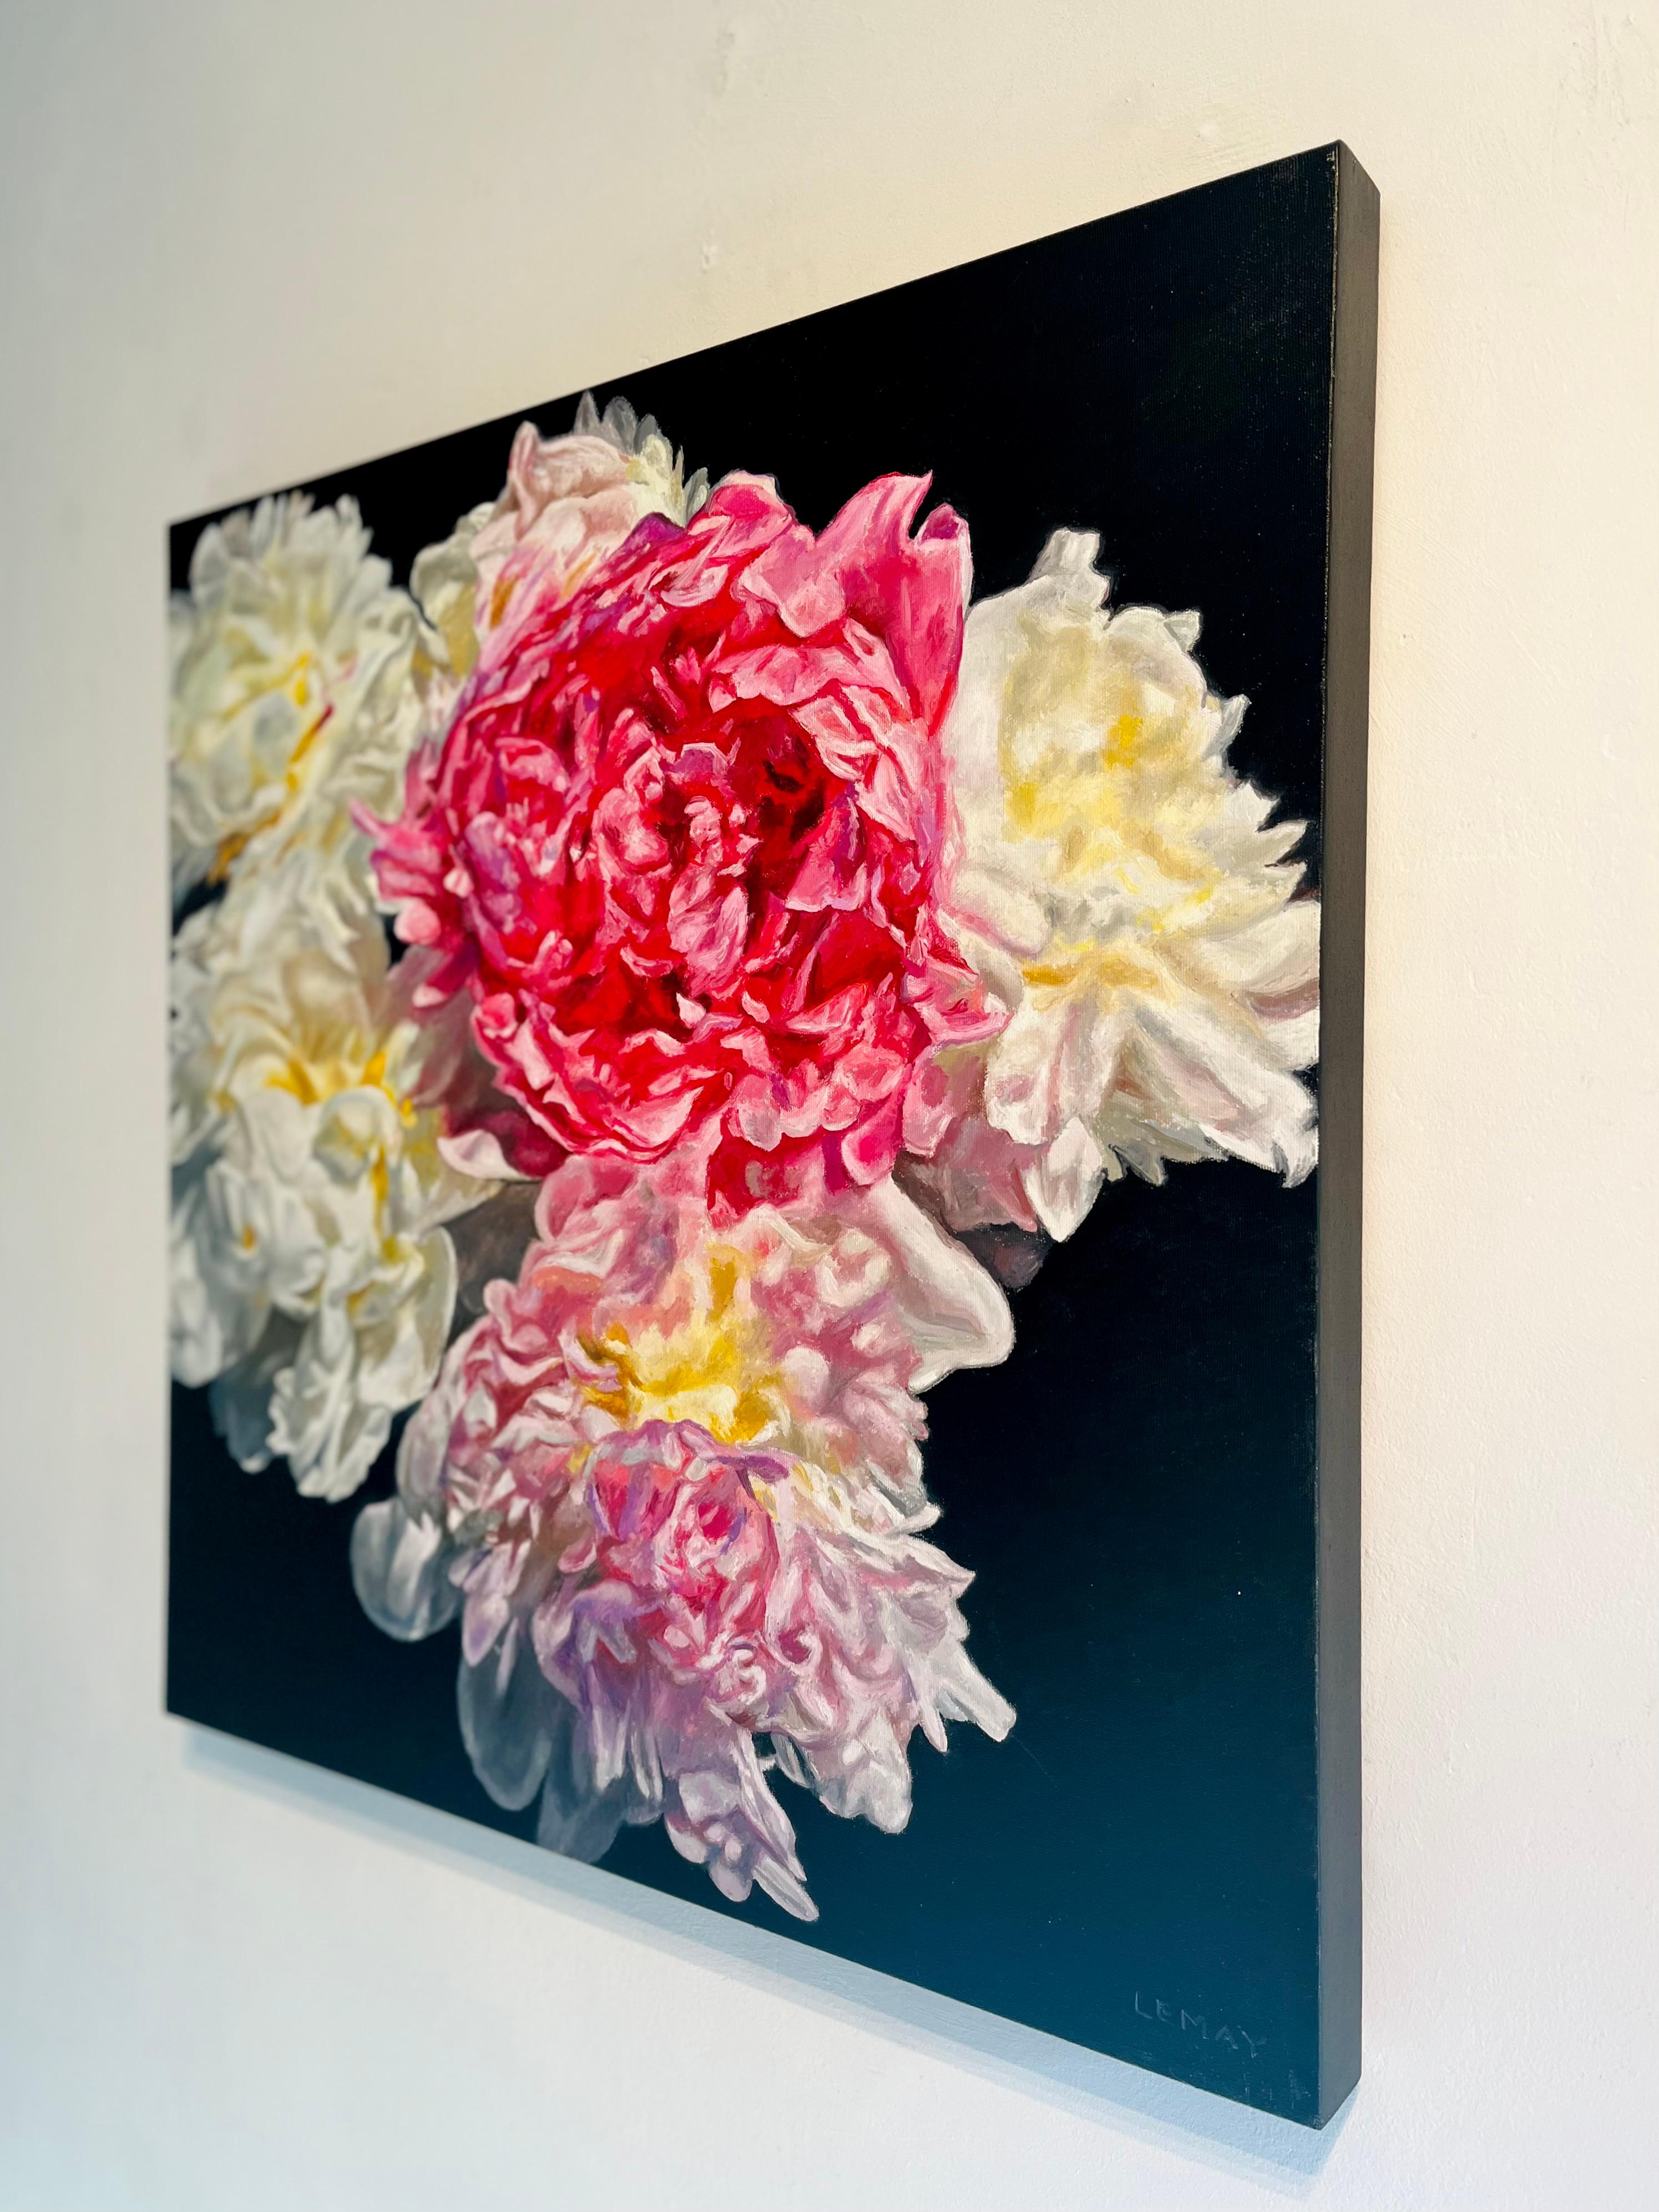 White an Pink Peonies-original modern realism floral painting-contemporary Art - Realist Painting by Robert Lemay